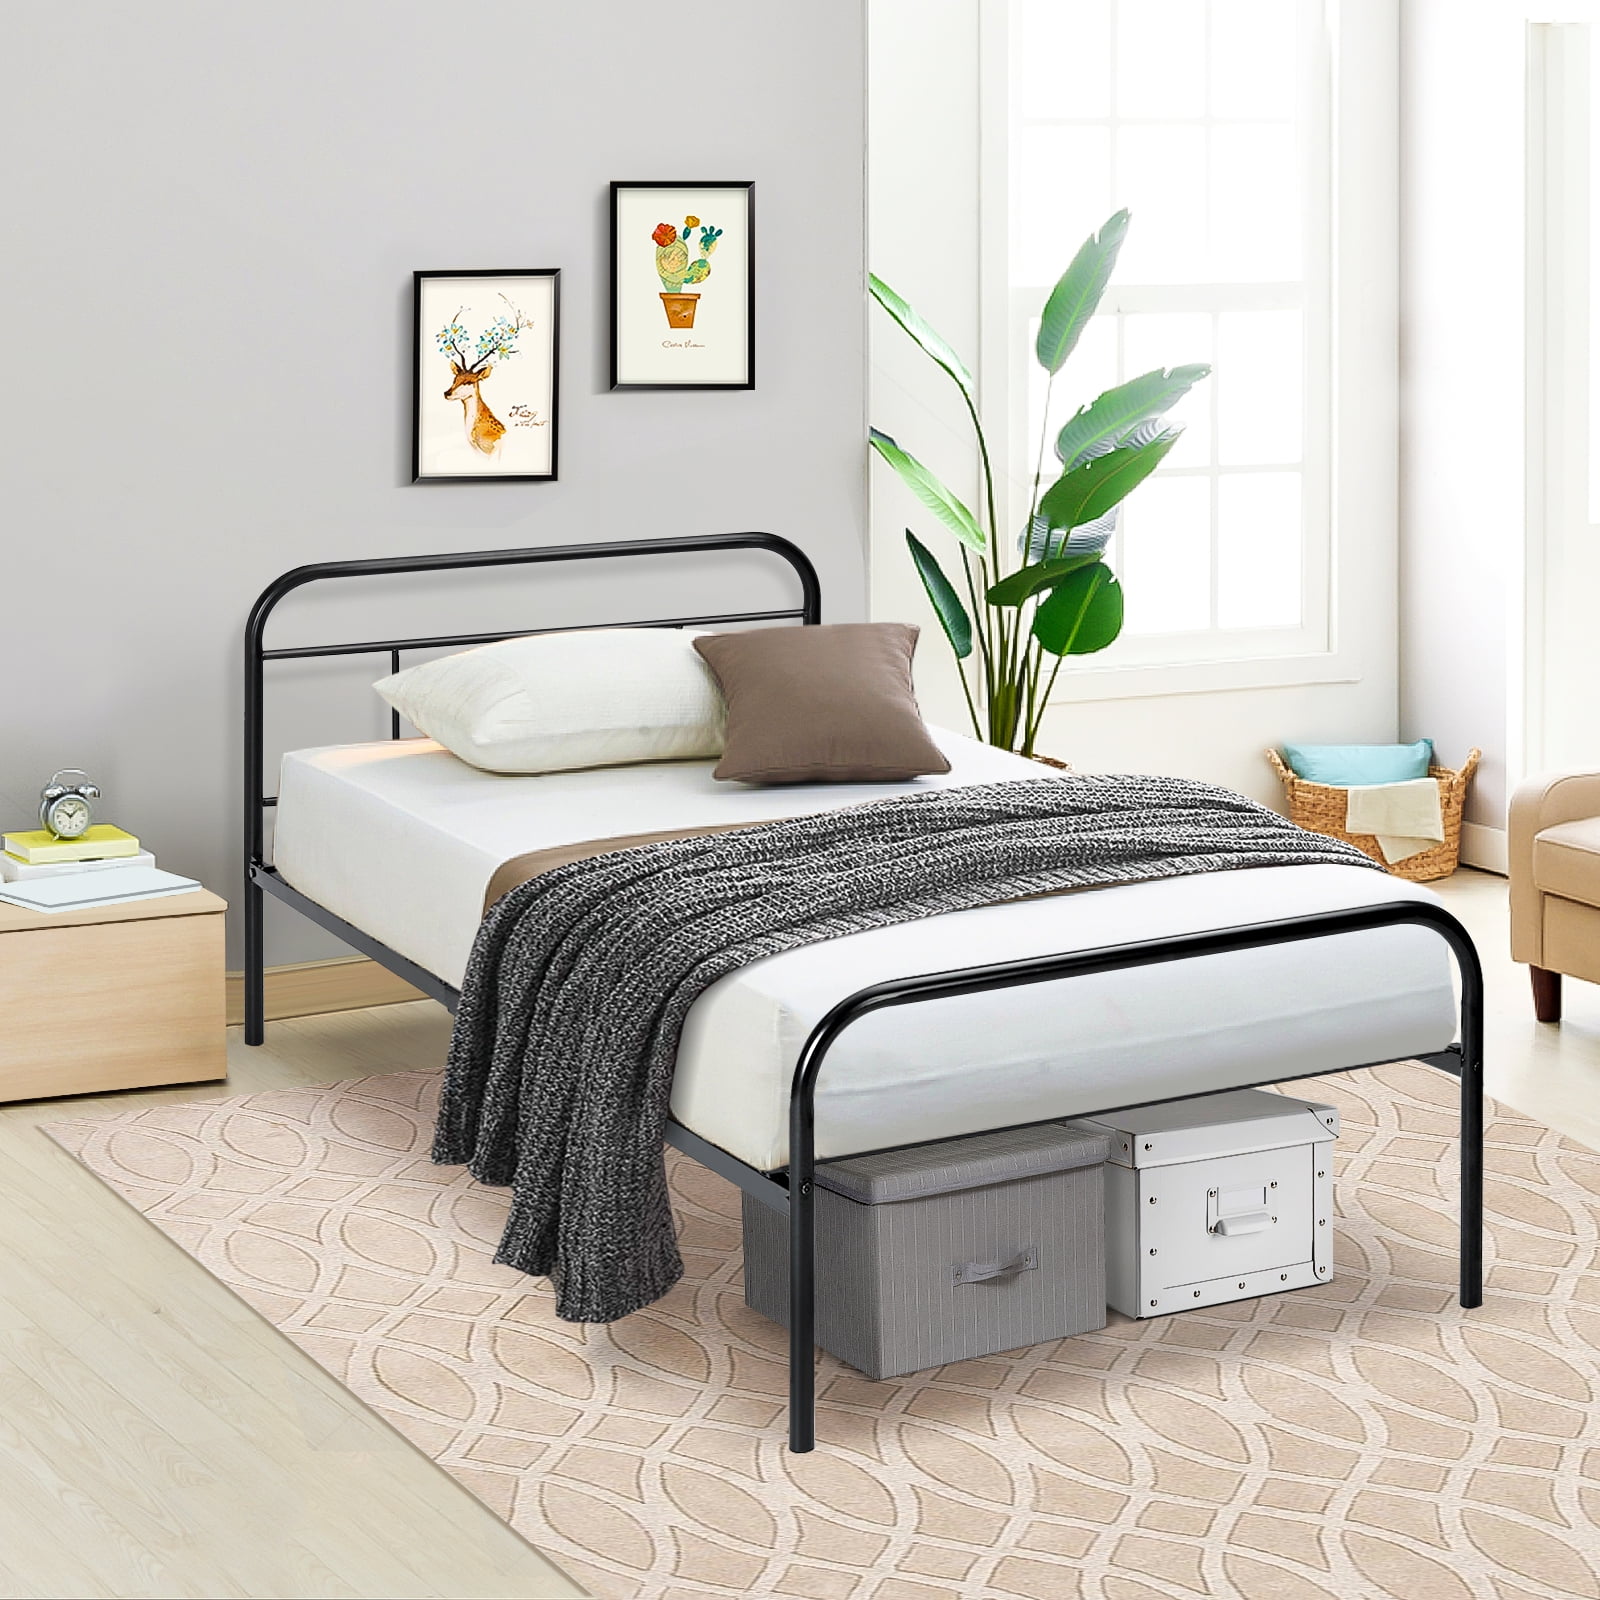 Stevenson chrysant Perforatie Lusimo Twin Metal Bed Frame with Headboard 300 lbs Load Capacity Easy  Assembly - Walmart.com